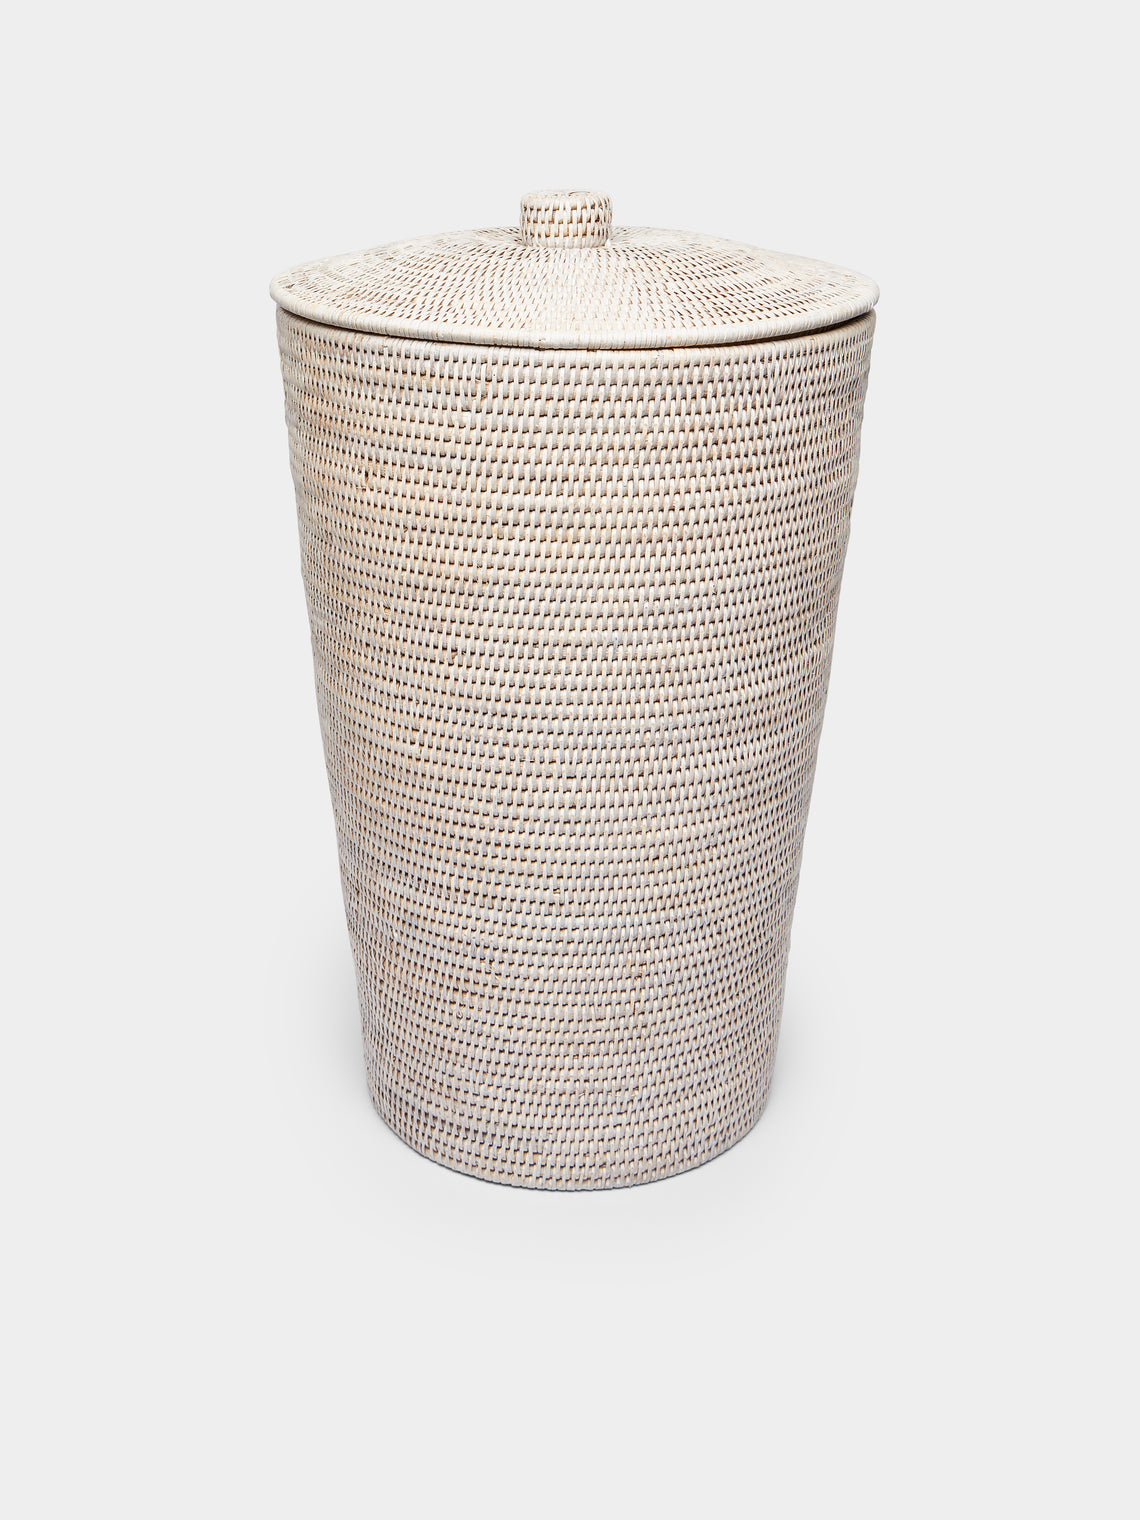 Décor Walther - Handwoven Rattan Laundry Basket -  - ABASK - 